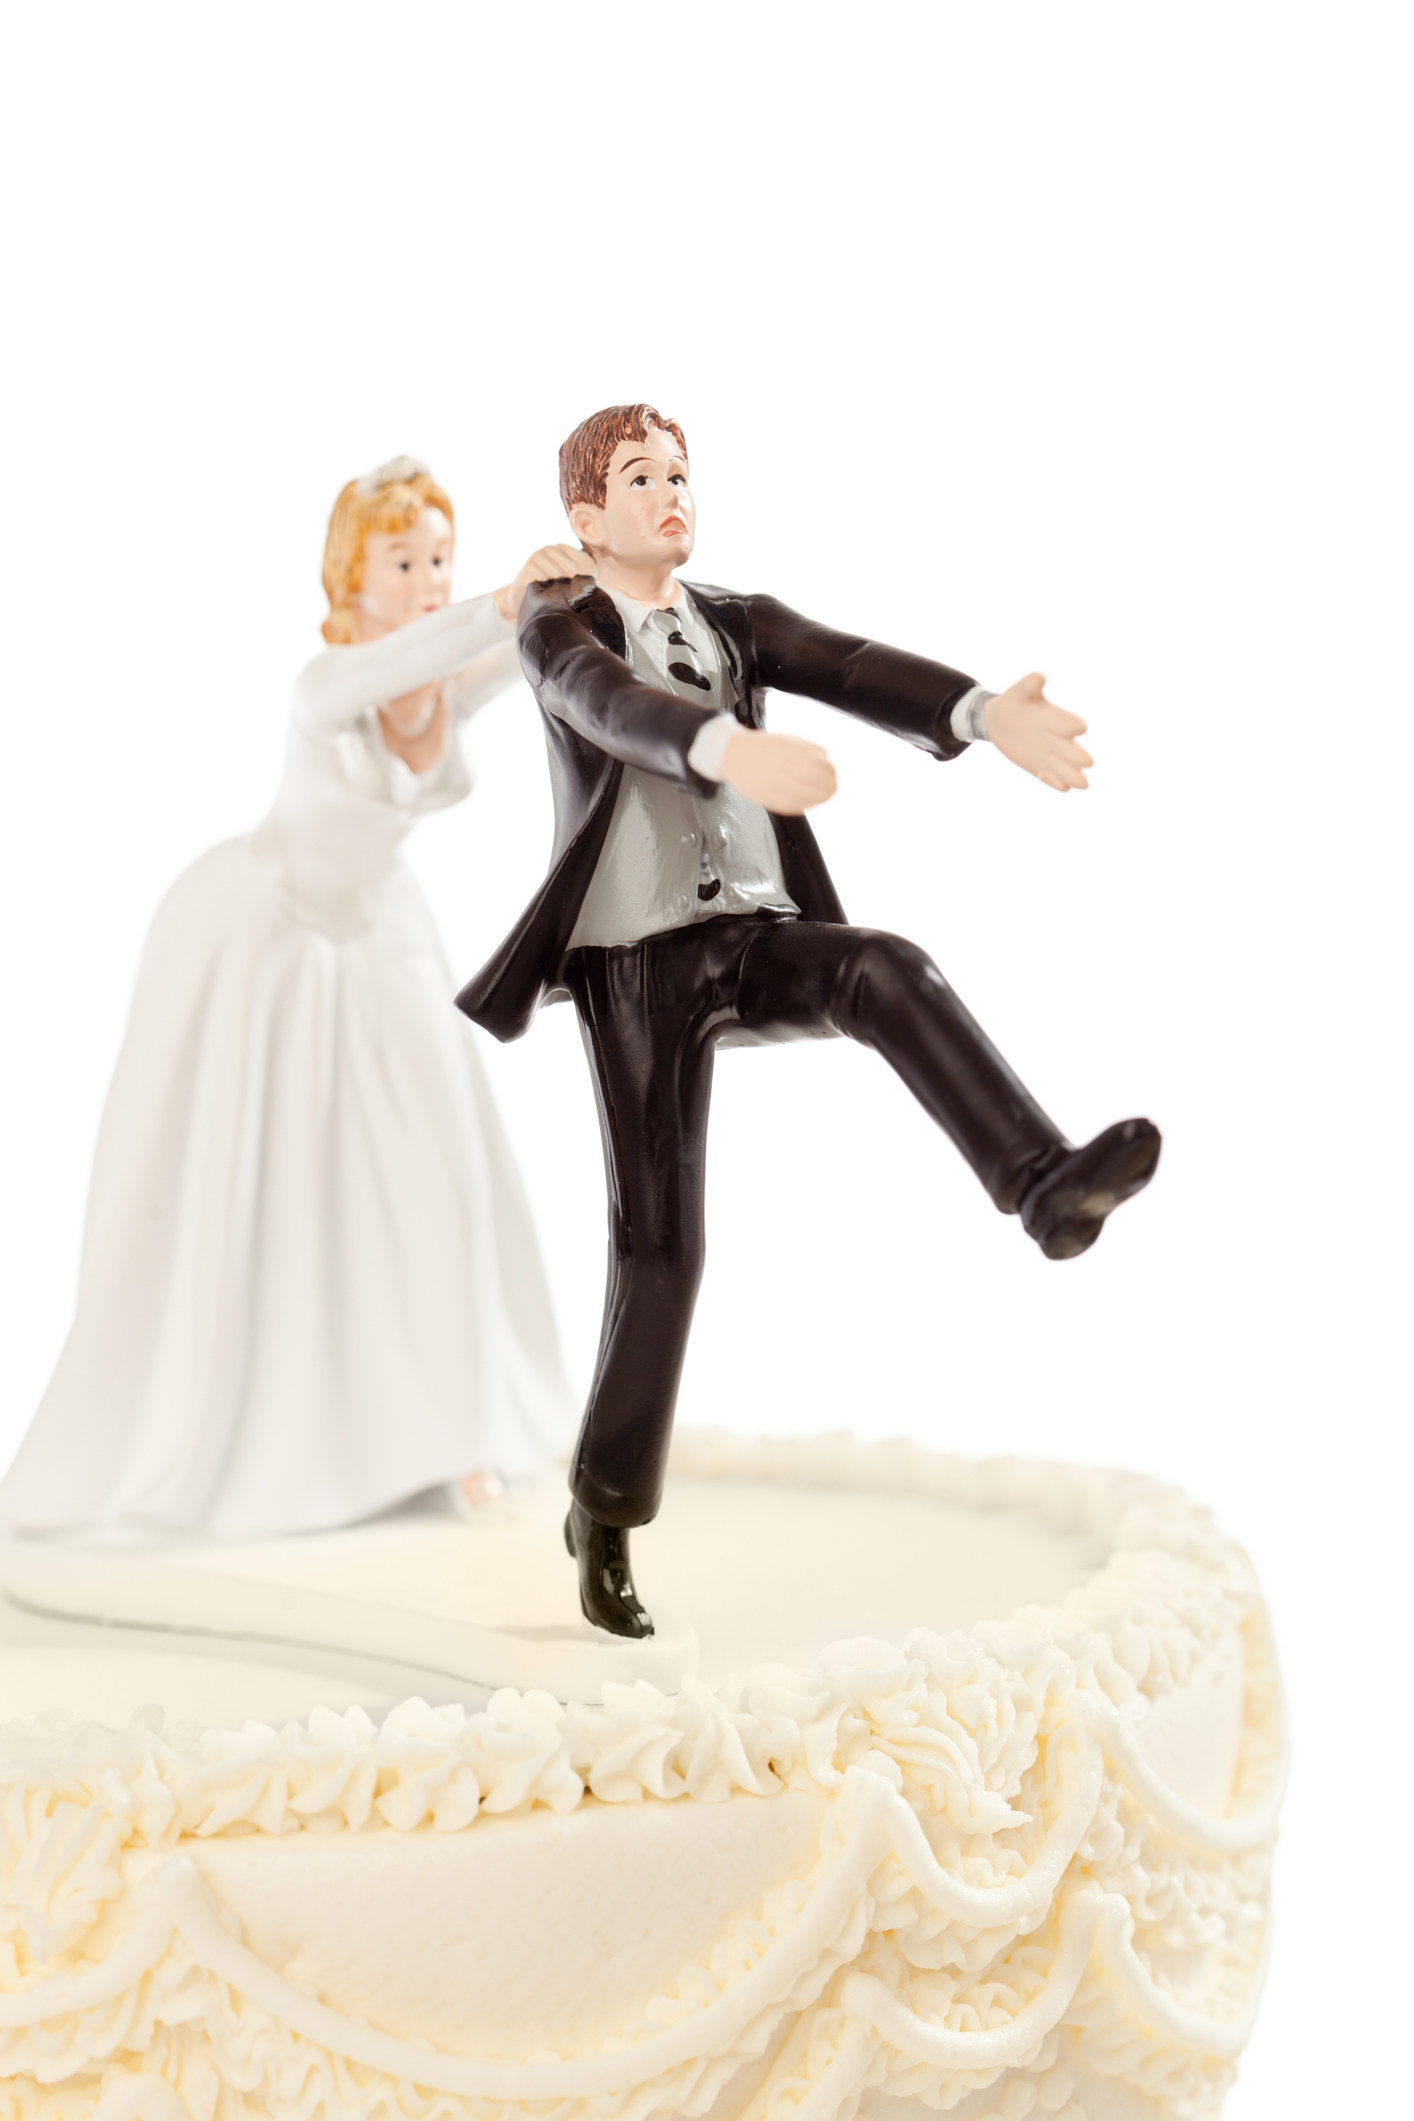 35 Wedding Cake Toppers for Every Couple's Style | Wedding cake topper  figurines, Funny wedding cake toppers, Groom wedding cakes